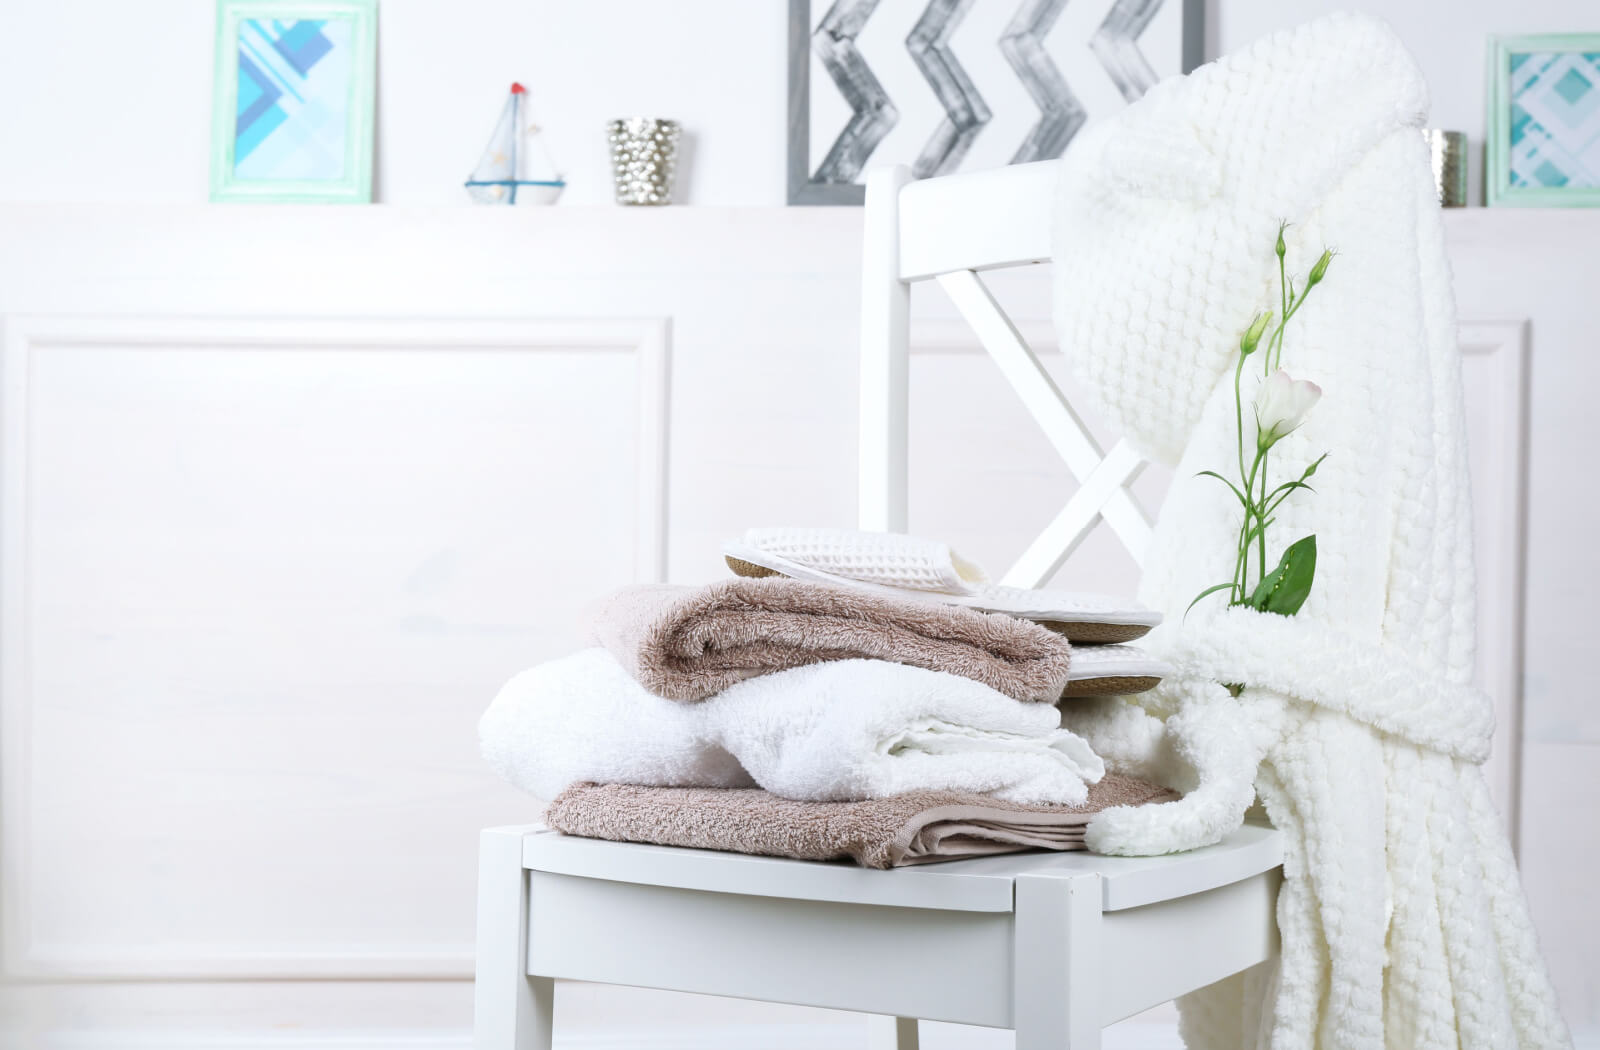 A set of towels and a bathrobe on a white wooden chair.